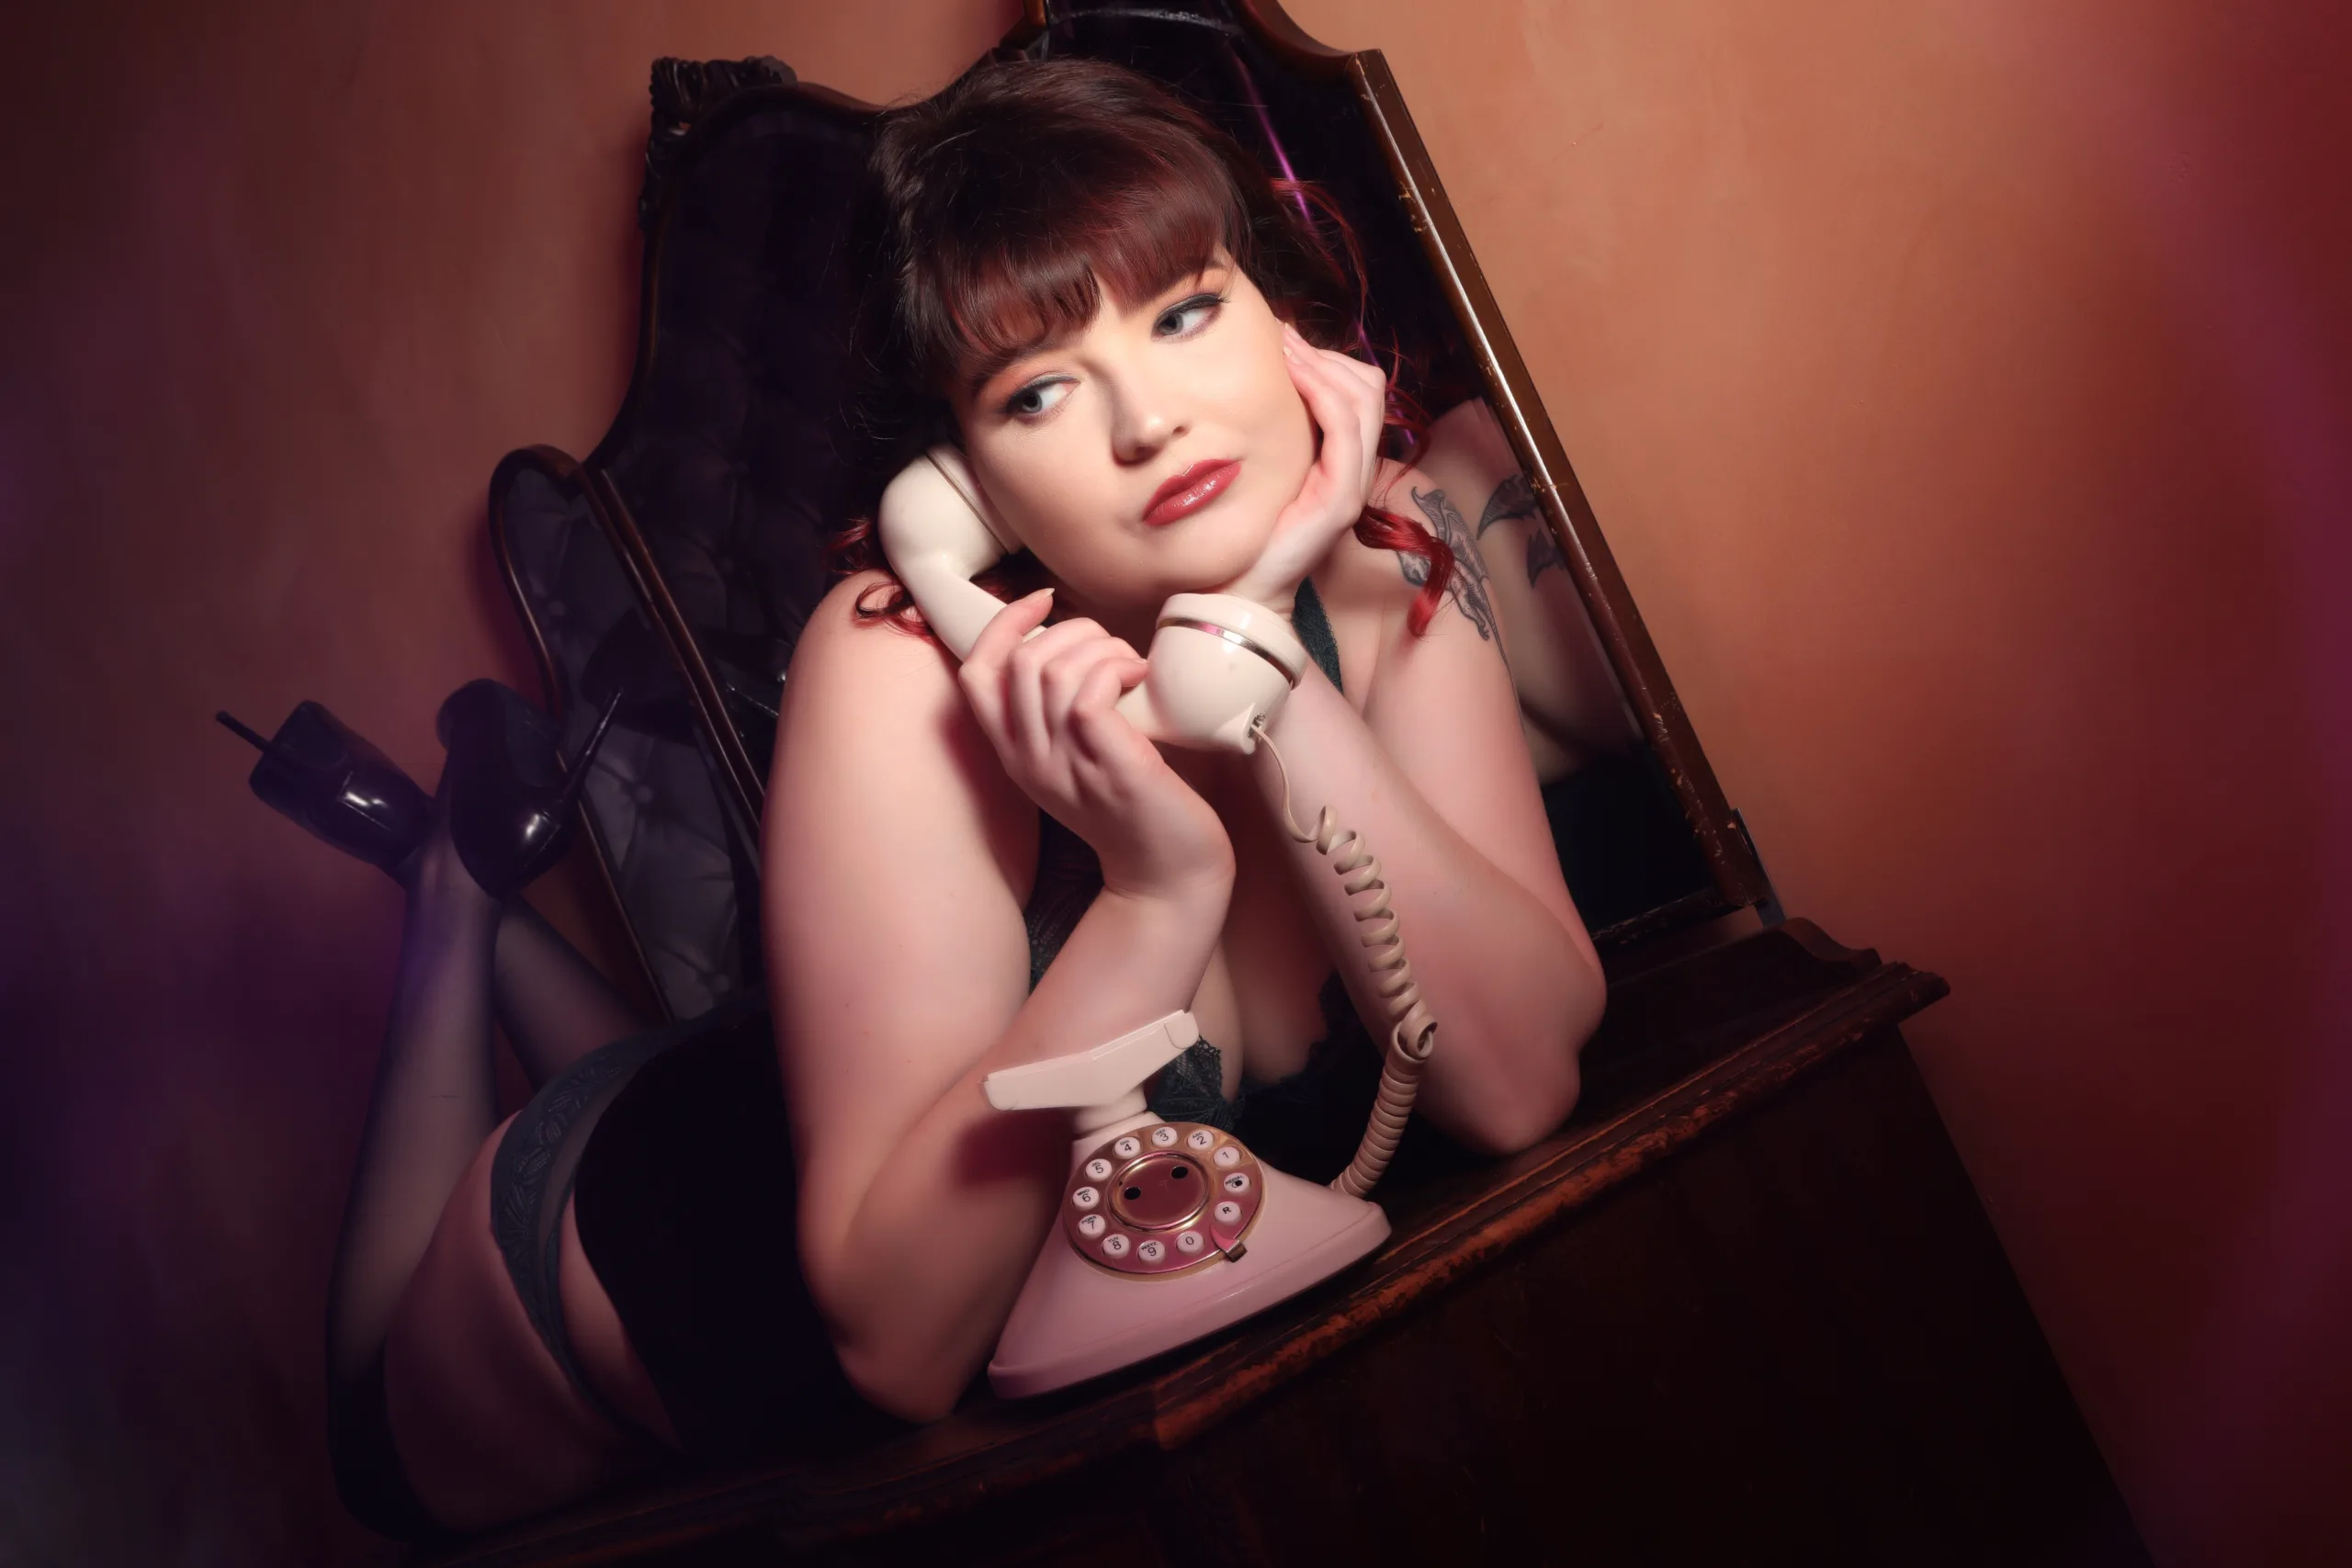 Woman on a table posing for a boudoir photoshoot with vintage phone